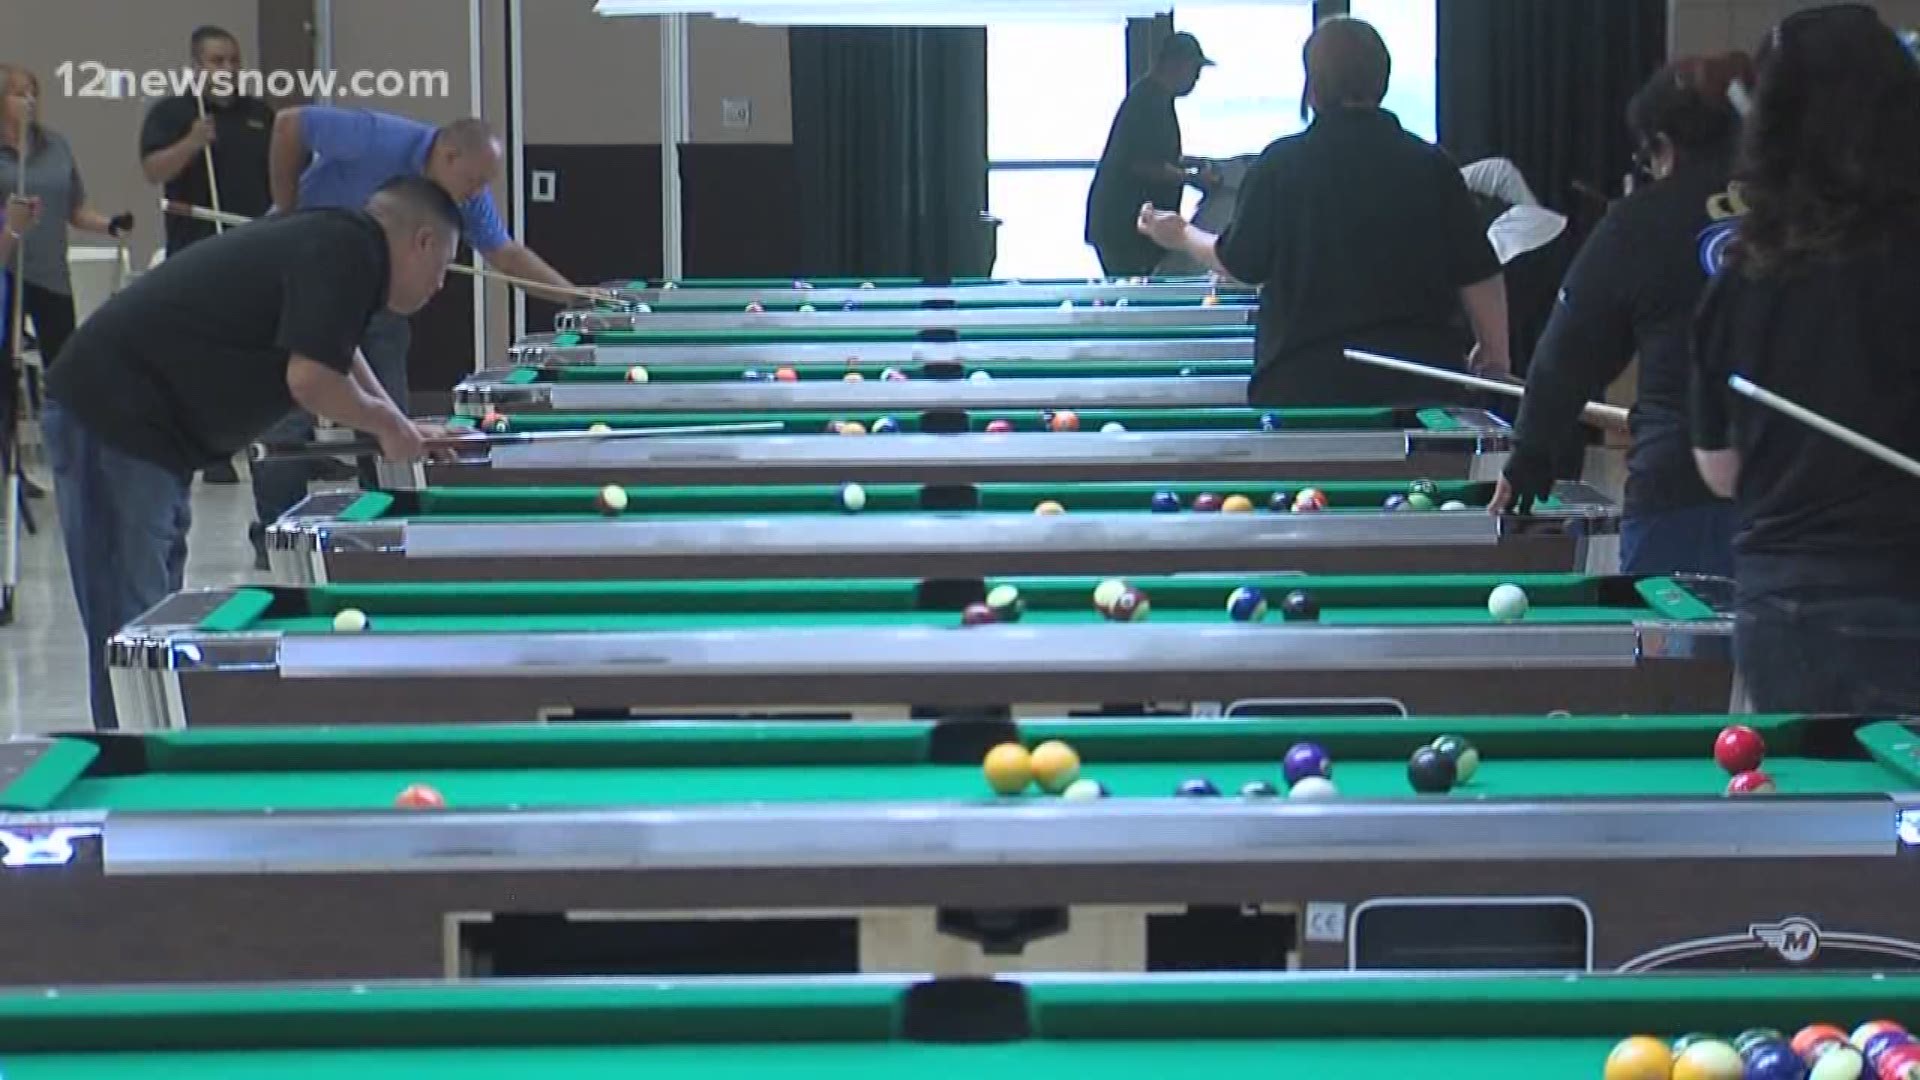 More than 400 people compete in in pool tournament in Port Arthur 12newsnow